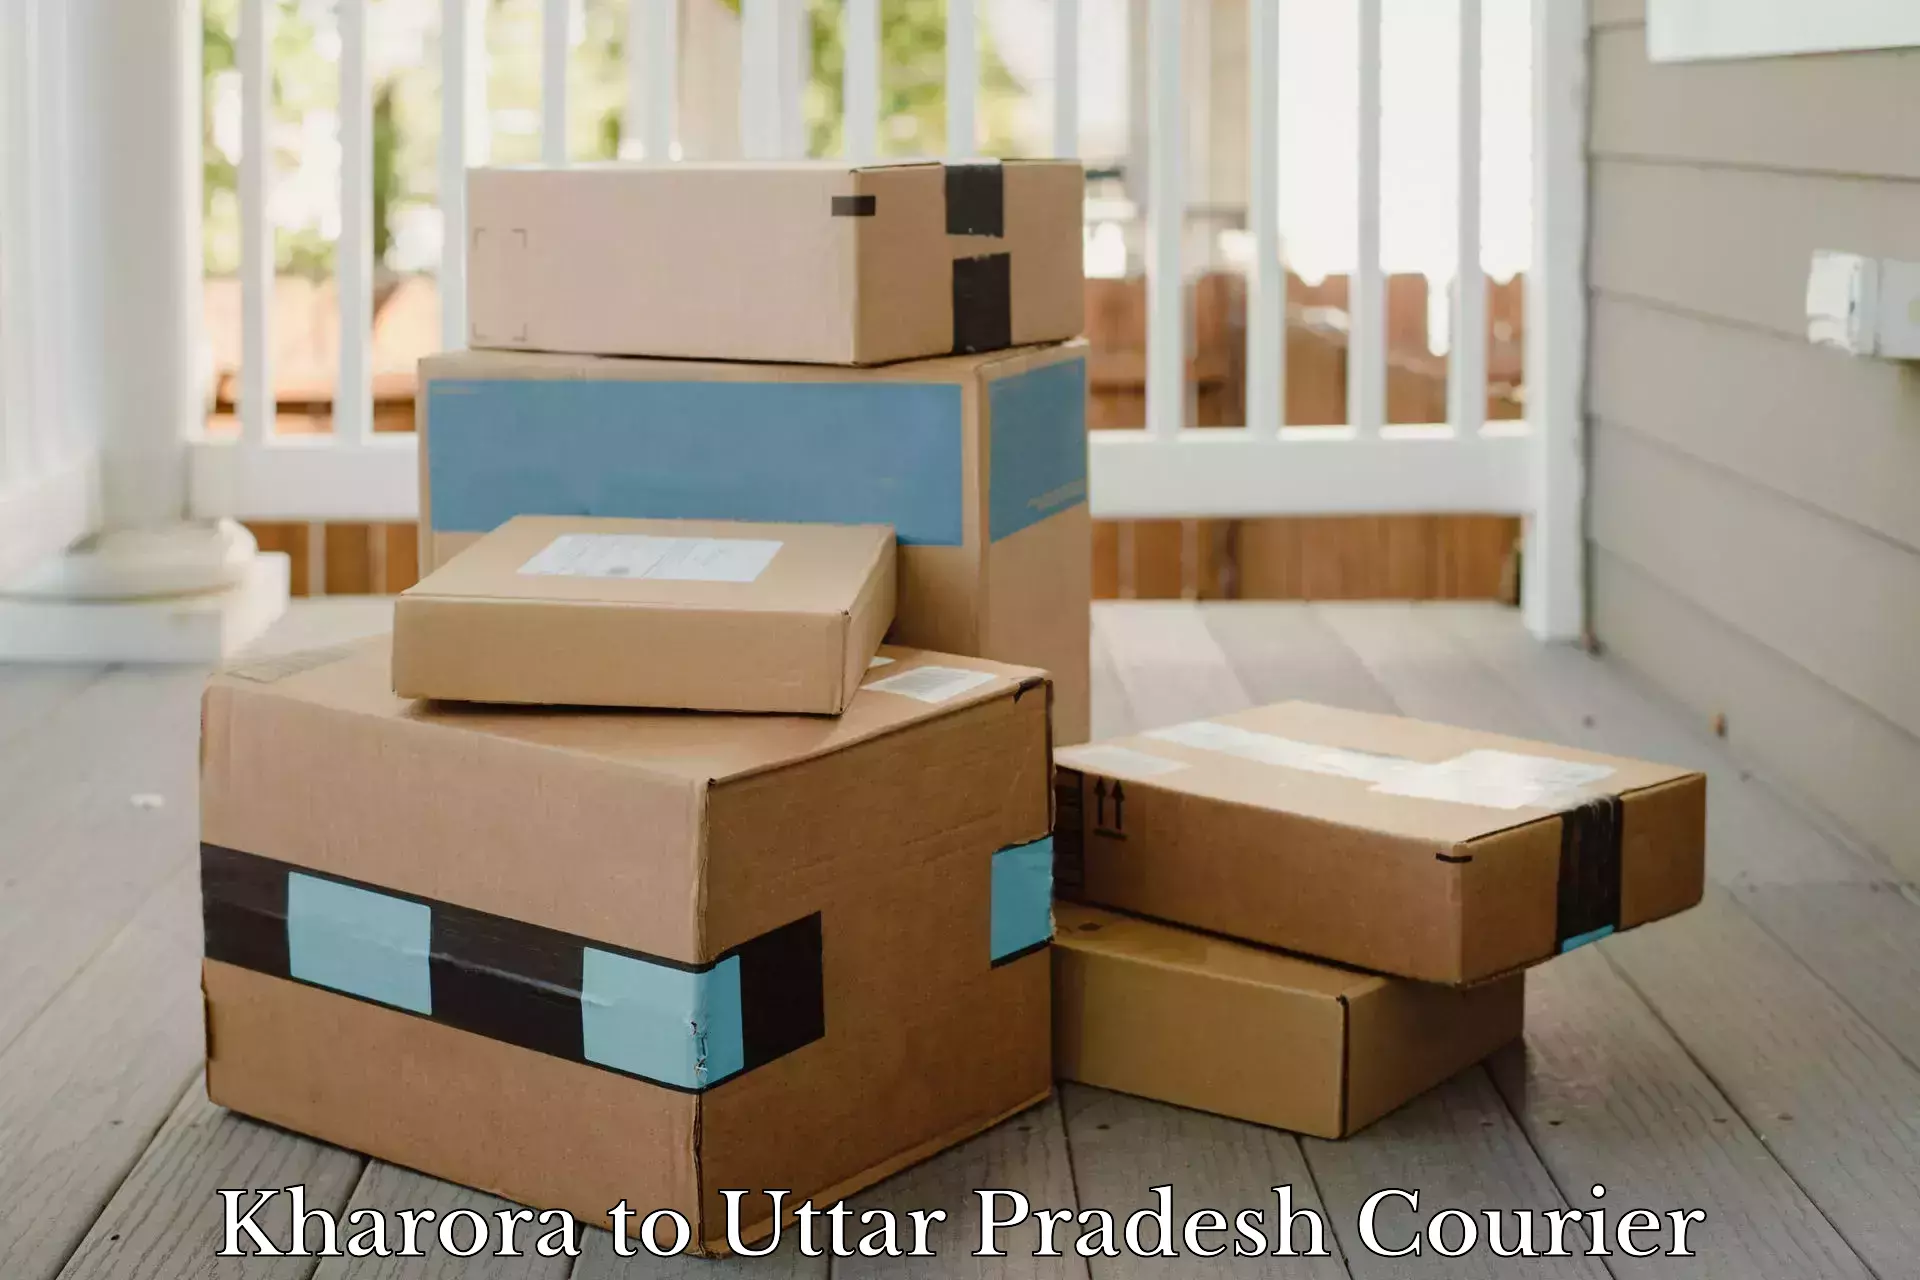 Rapid shipping services Kharora to Bareilly